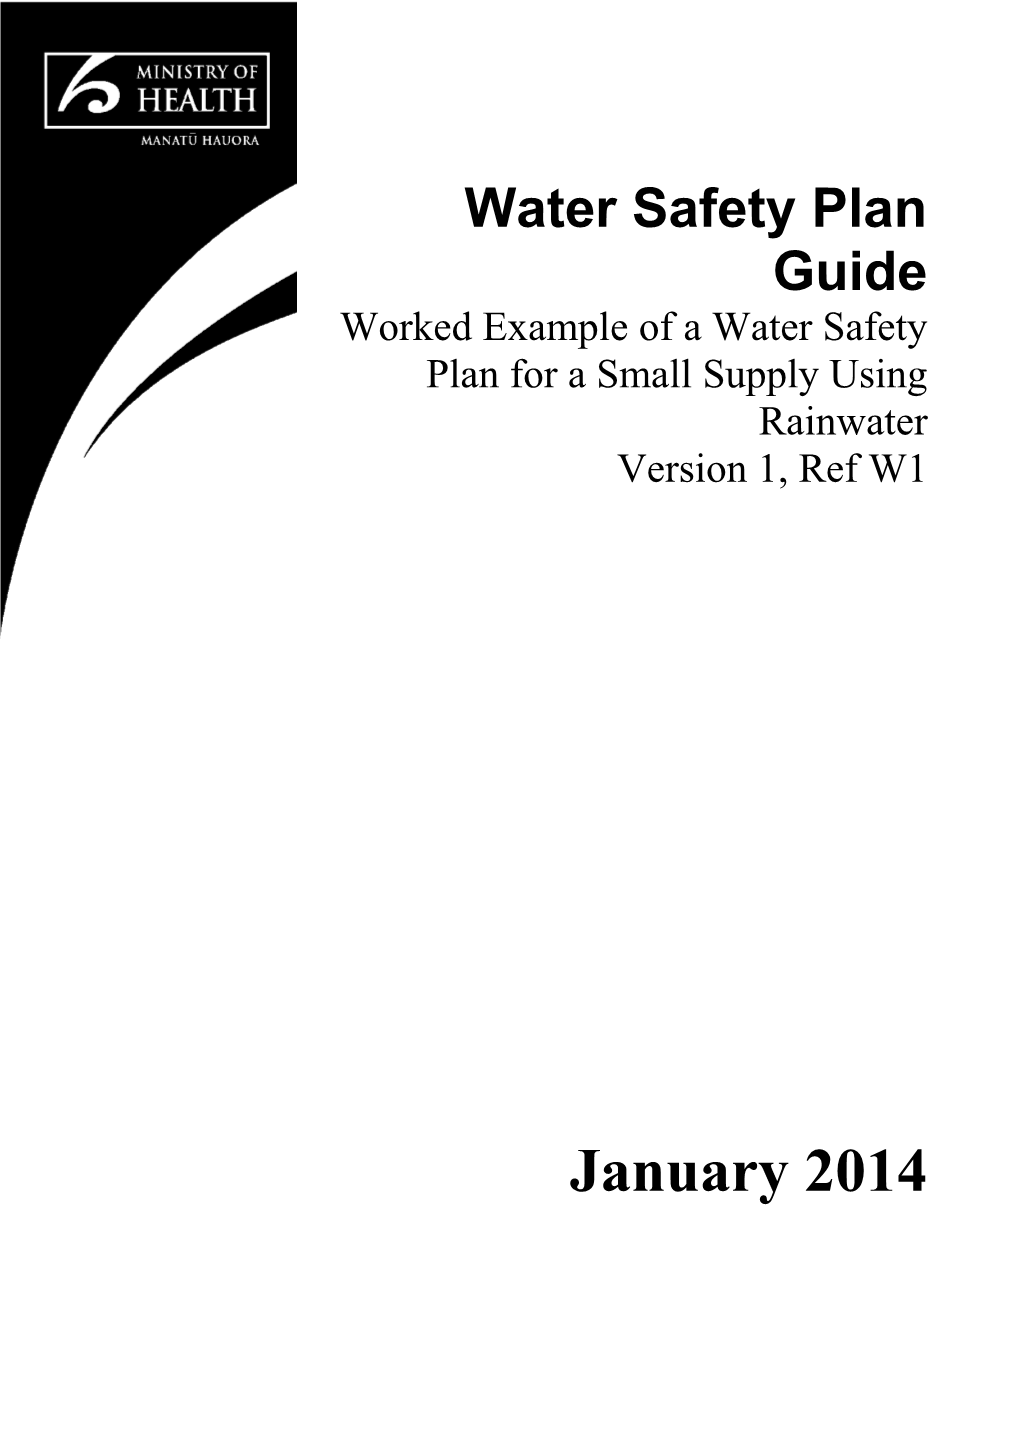 Water Safety Plan Guide: Worked Example of a Water Safety Plan for a Small Supply Using